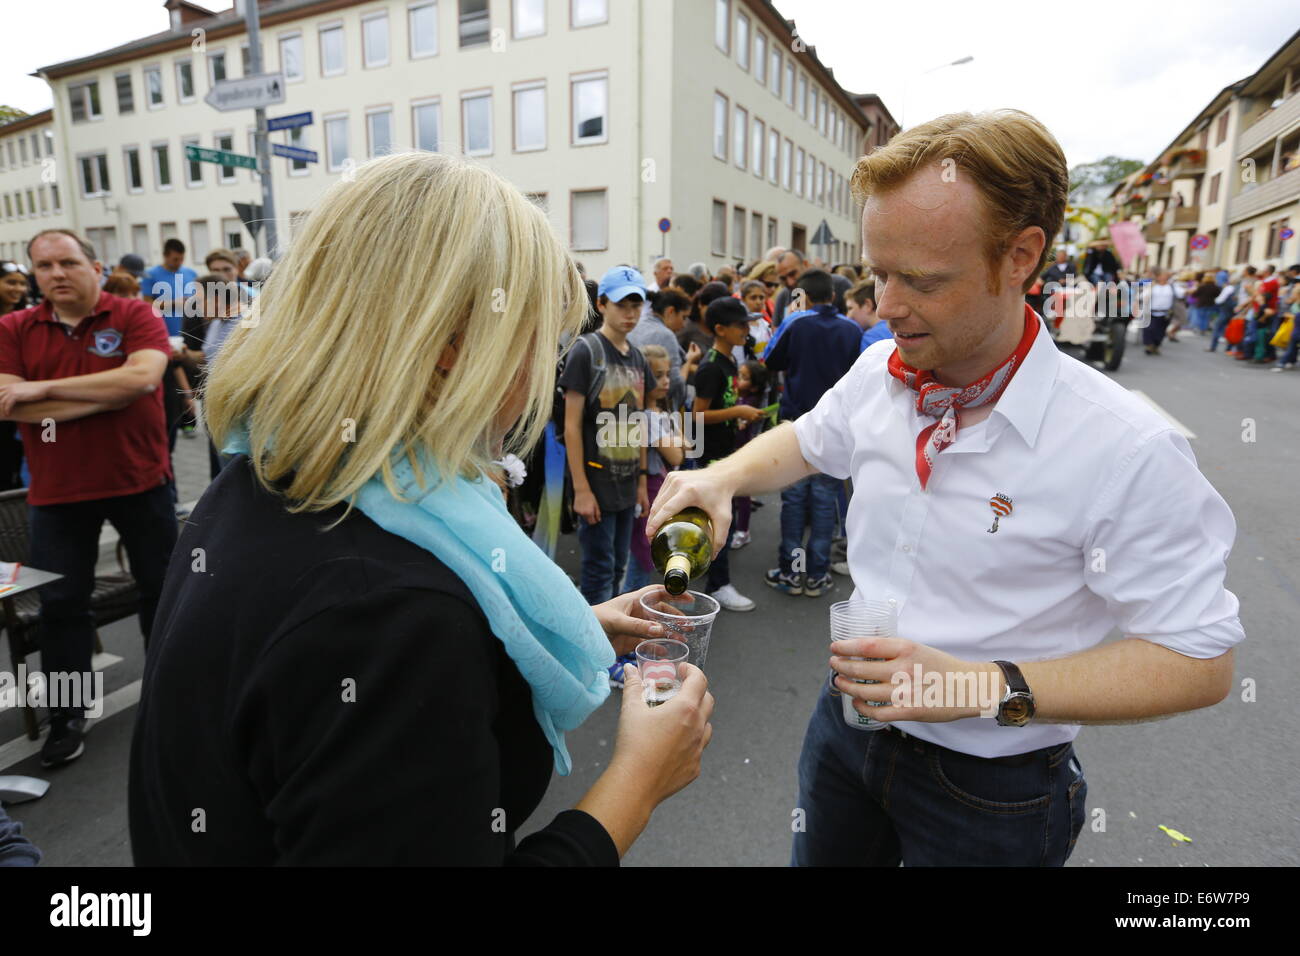 Worms, Germany. 31st Aug, 2014. Jan Metzler, the local MdB (member of the German parliament) from the conservative CDU, pours wine to a visitor at the the Backfischfest parade 2014. The first highlight of this year's Backfischfest was the big parade through the city of Worms with 125 groups and floats. Community groups, sport clubs, music groups and business from Worms and further afield took part. © Michael Debets/Pacific Press/Alamy Live News Stock Photo